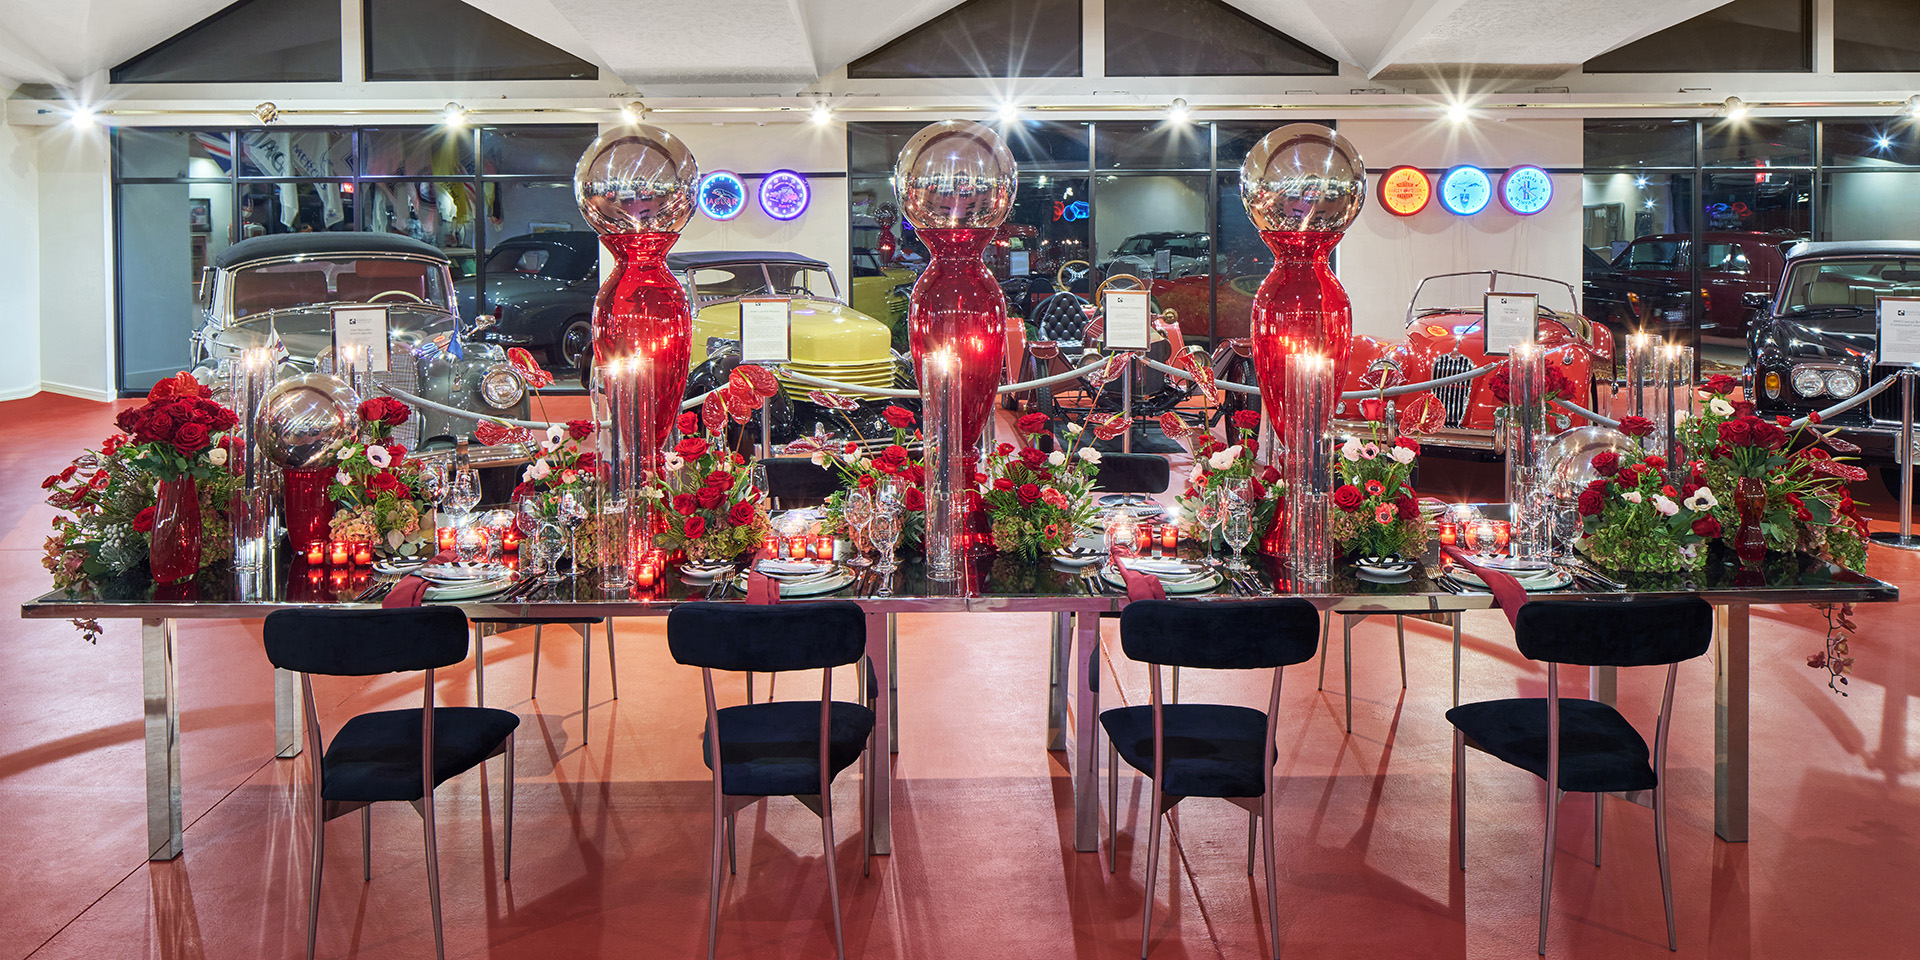 event table setup in a car museum